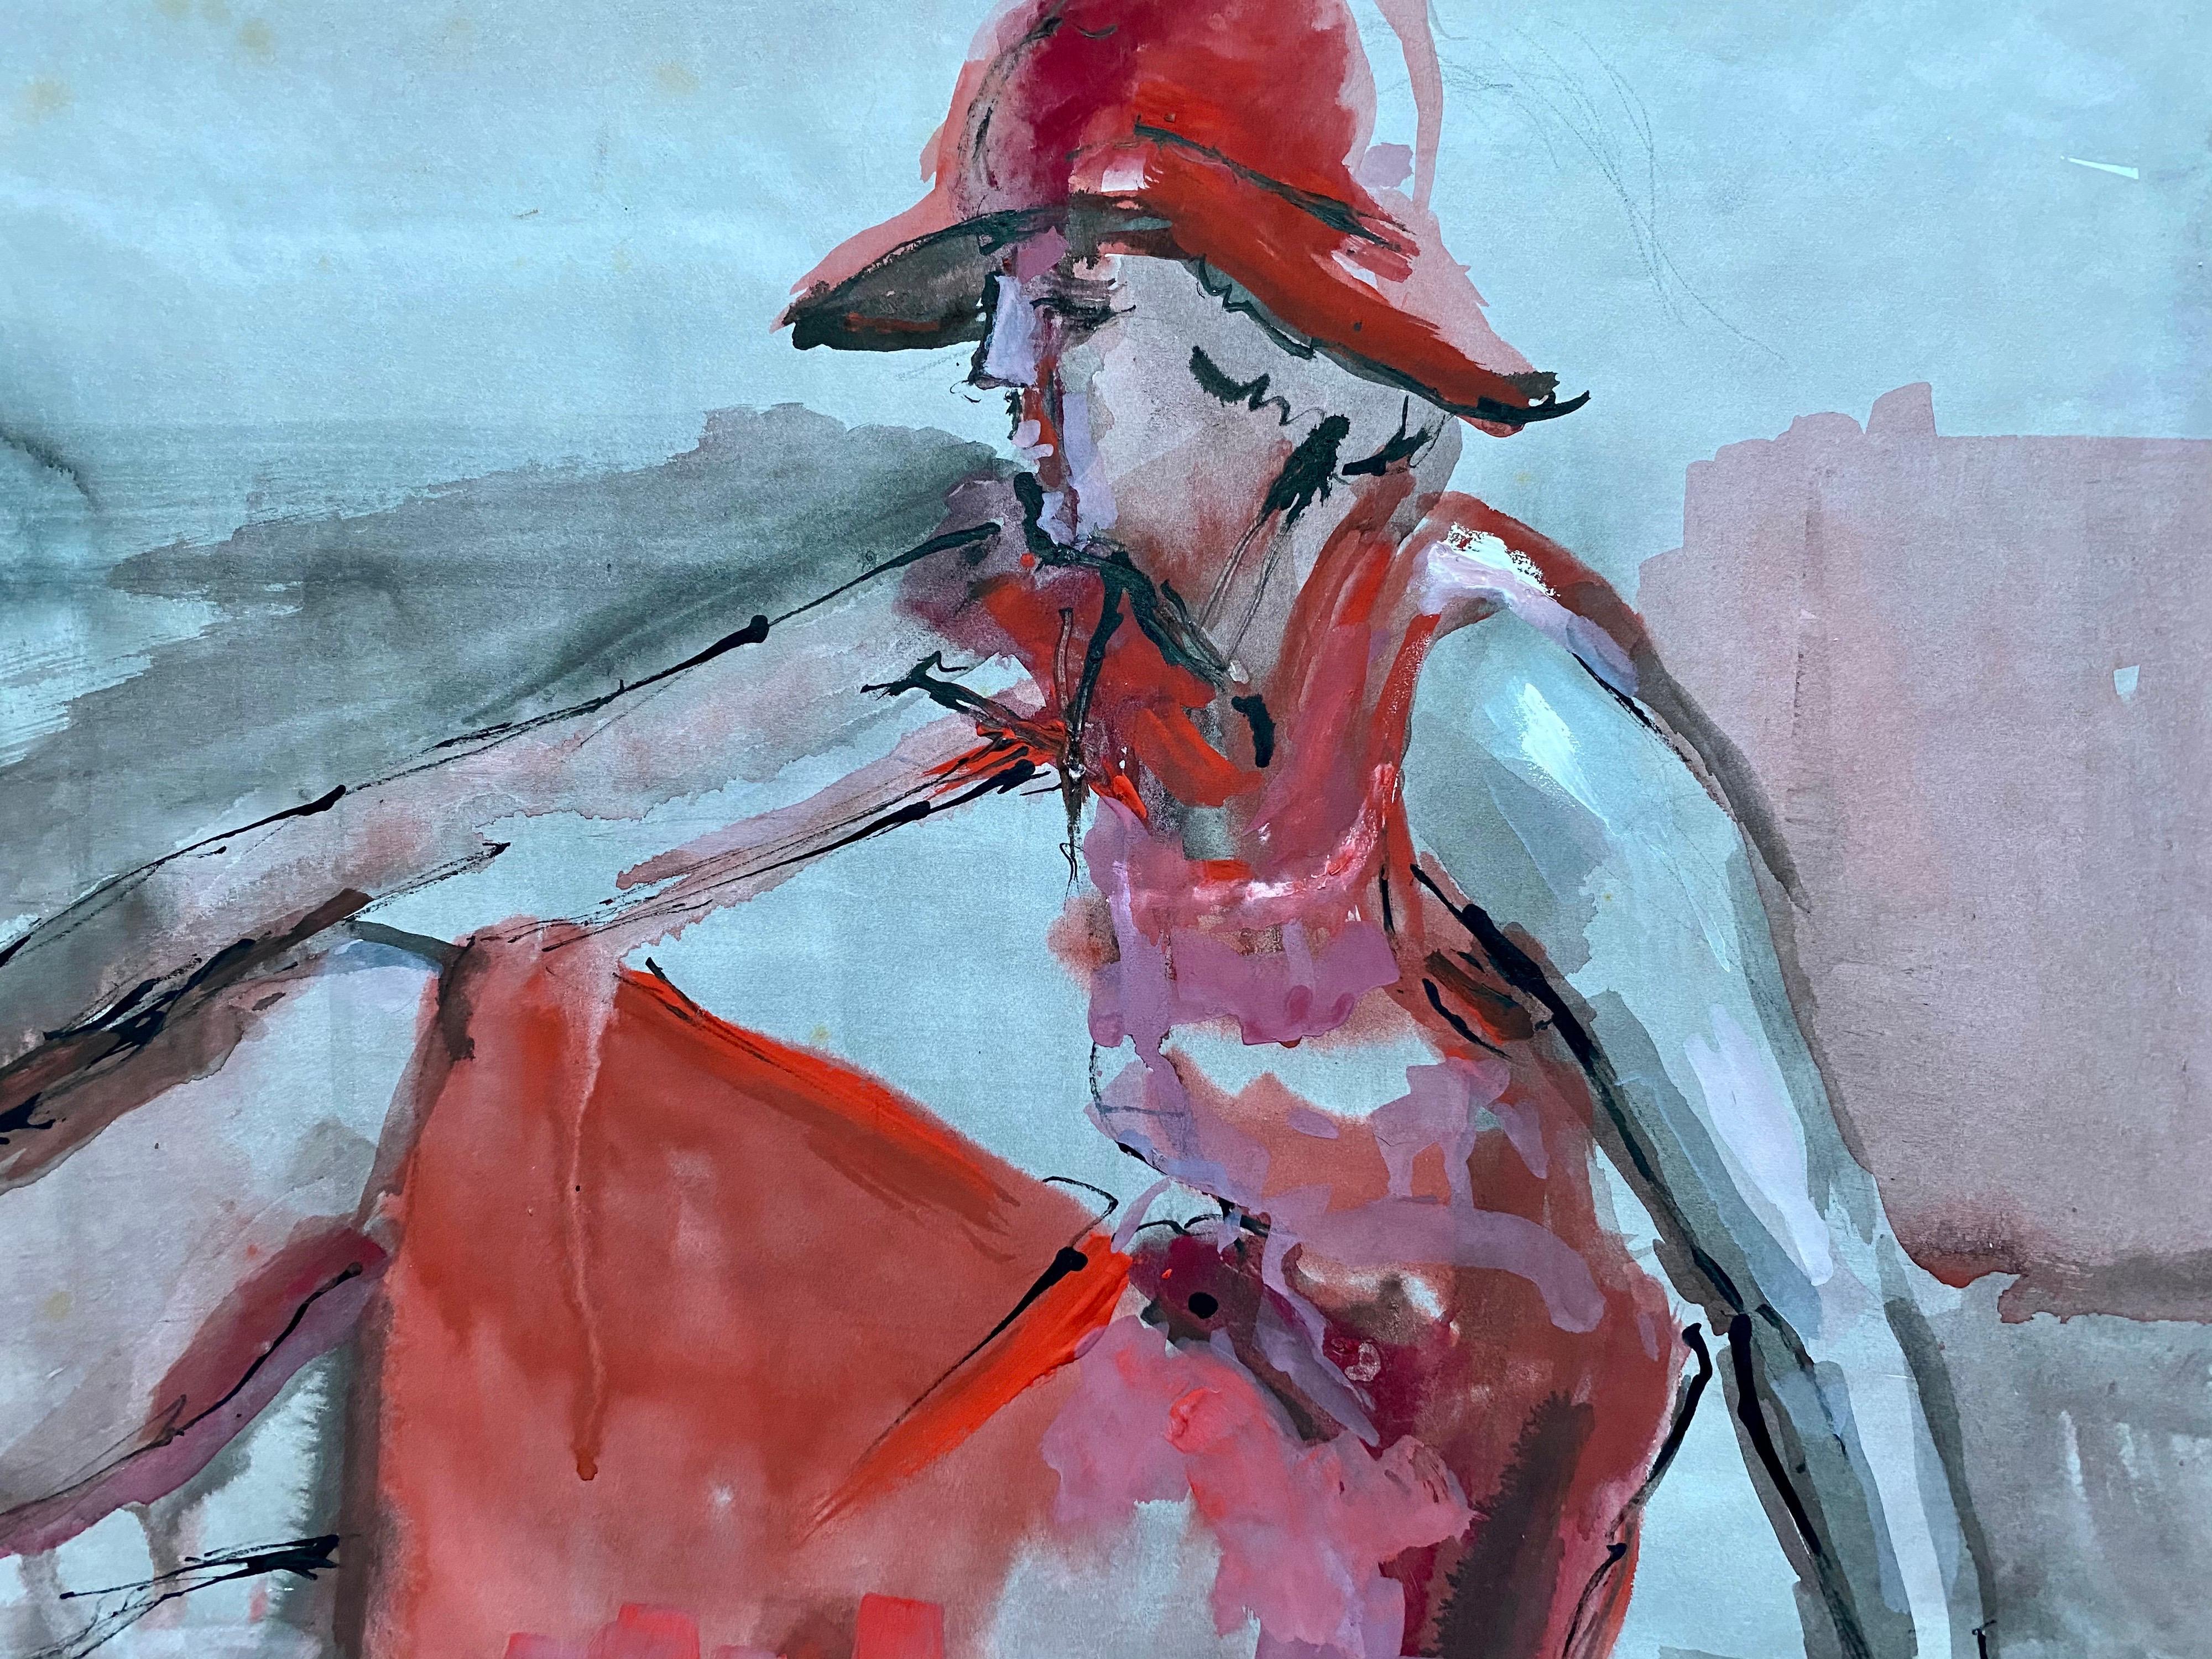 Artist/ School: French School, mid 20th century.

Title: Lady in red.

Medium: watercolour on artists paper.

Size: painting: 15 x 19.75 inches.
 
Provenance: private collection, France.

Condition: The painting is in very good